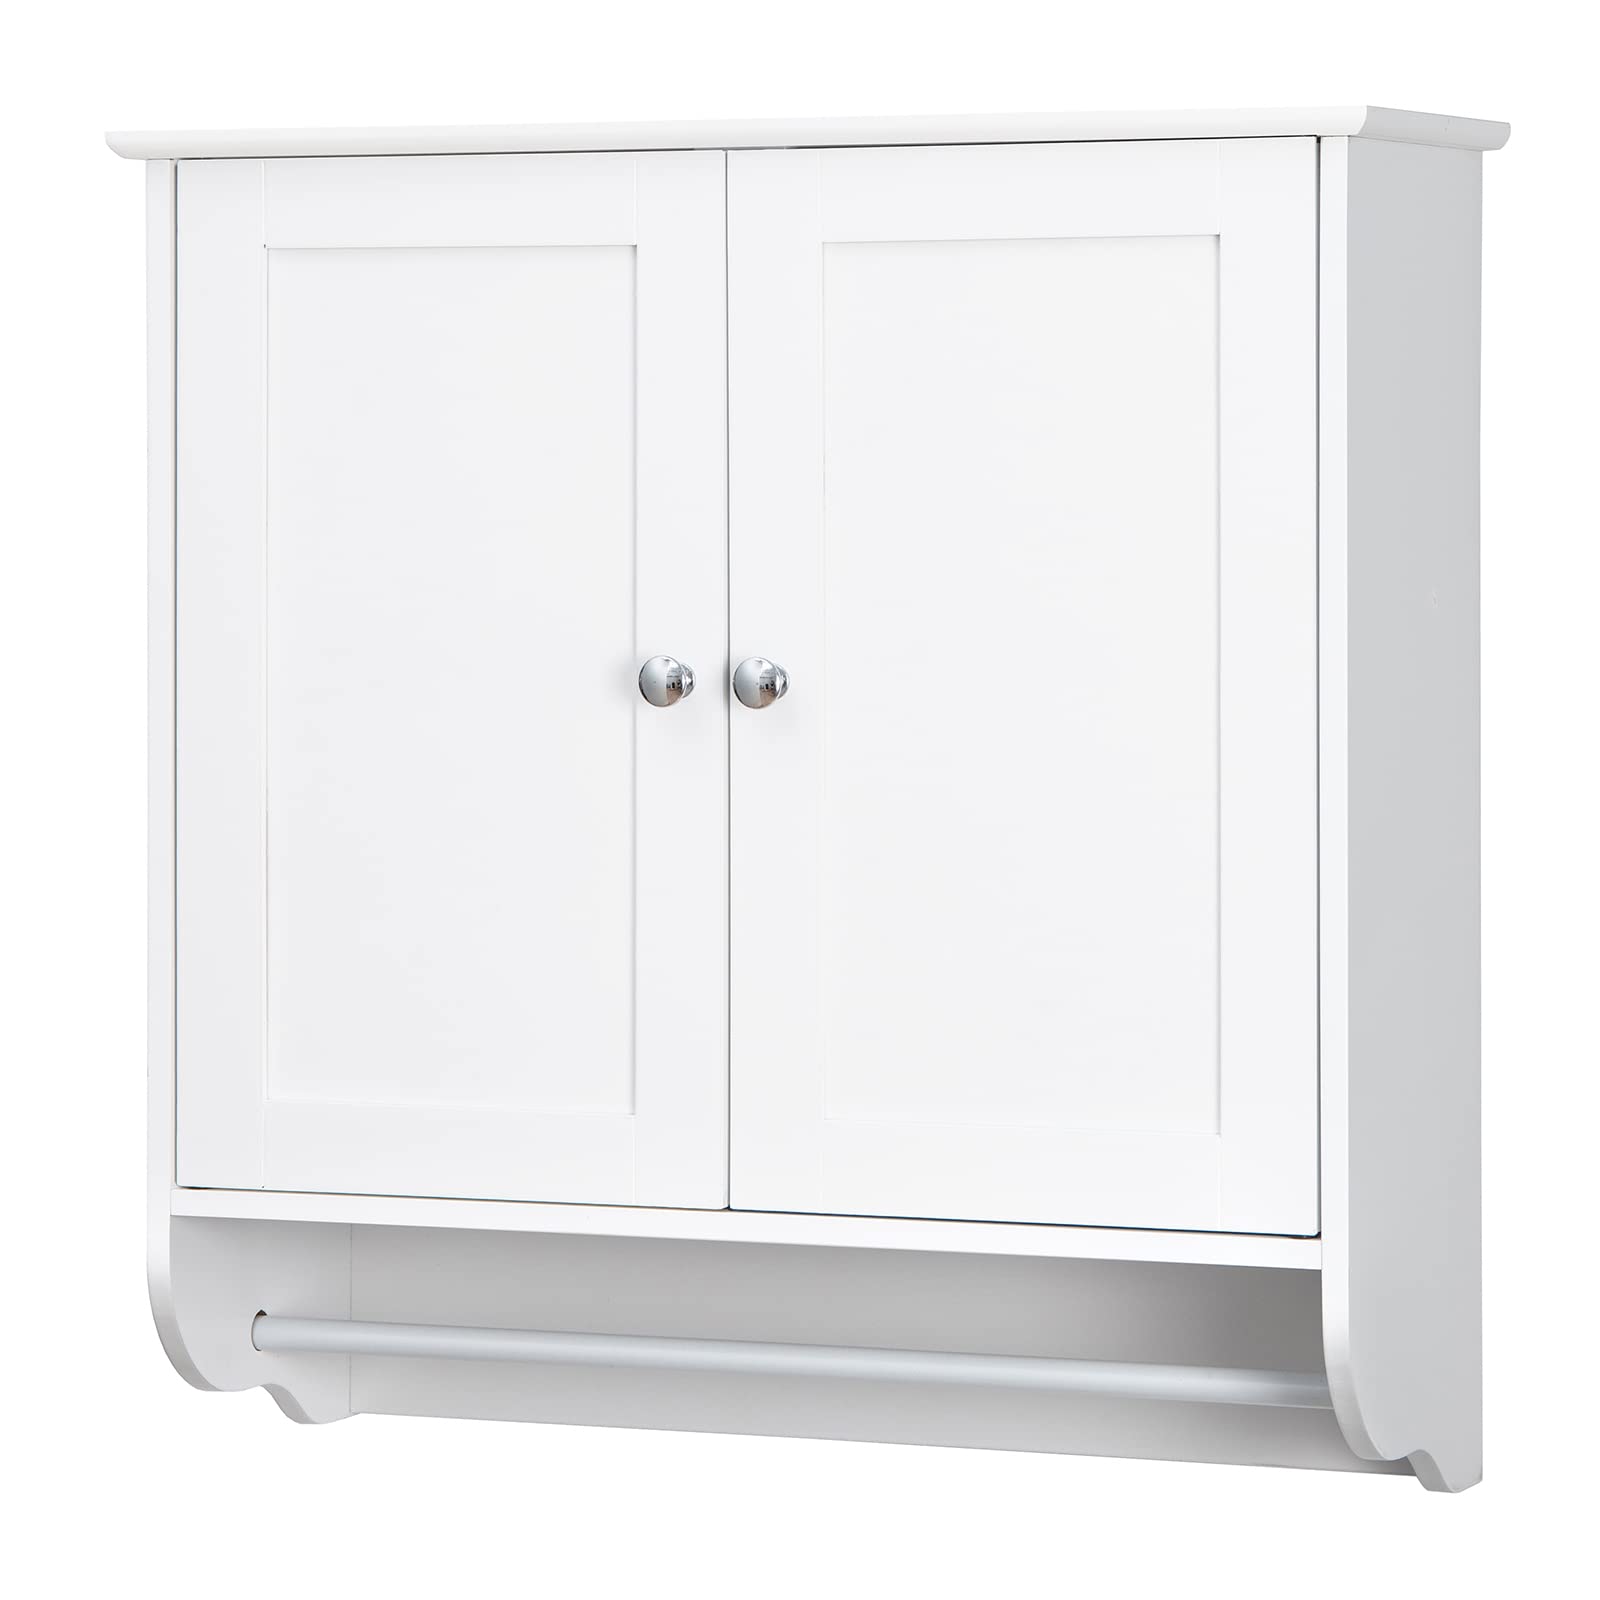 Bathroom Cabinet Wall Mounted - Over The Toilet Medicine Cabinet with Double Doors -  Giantex